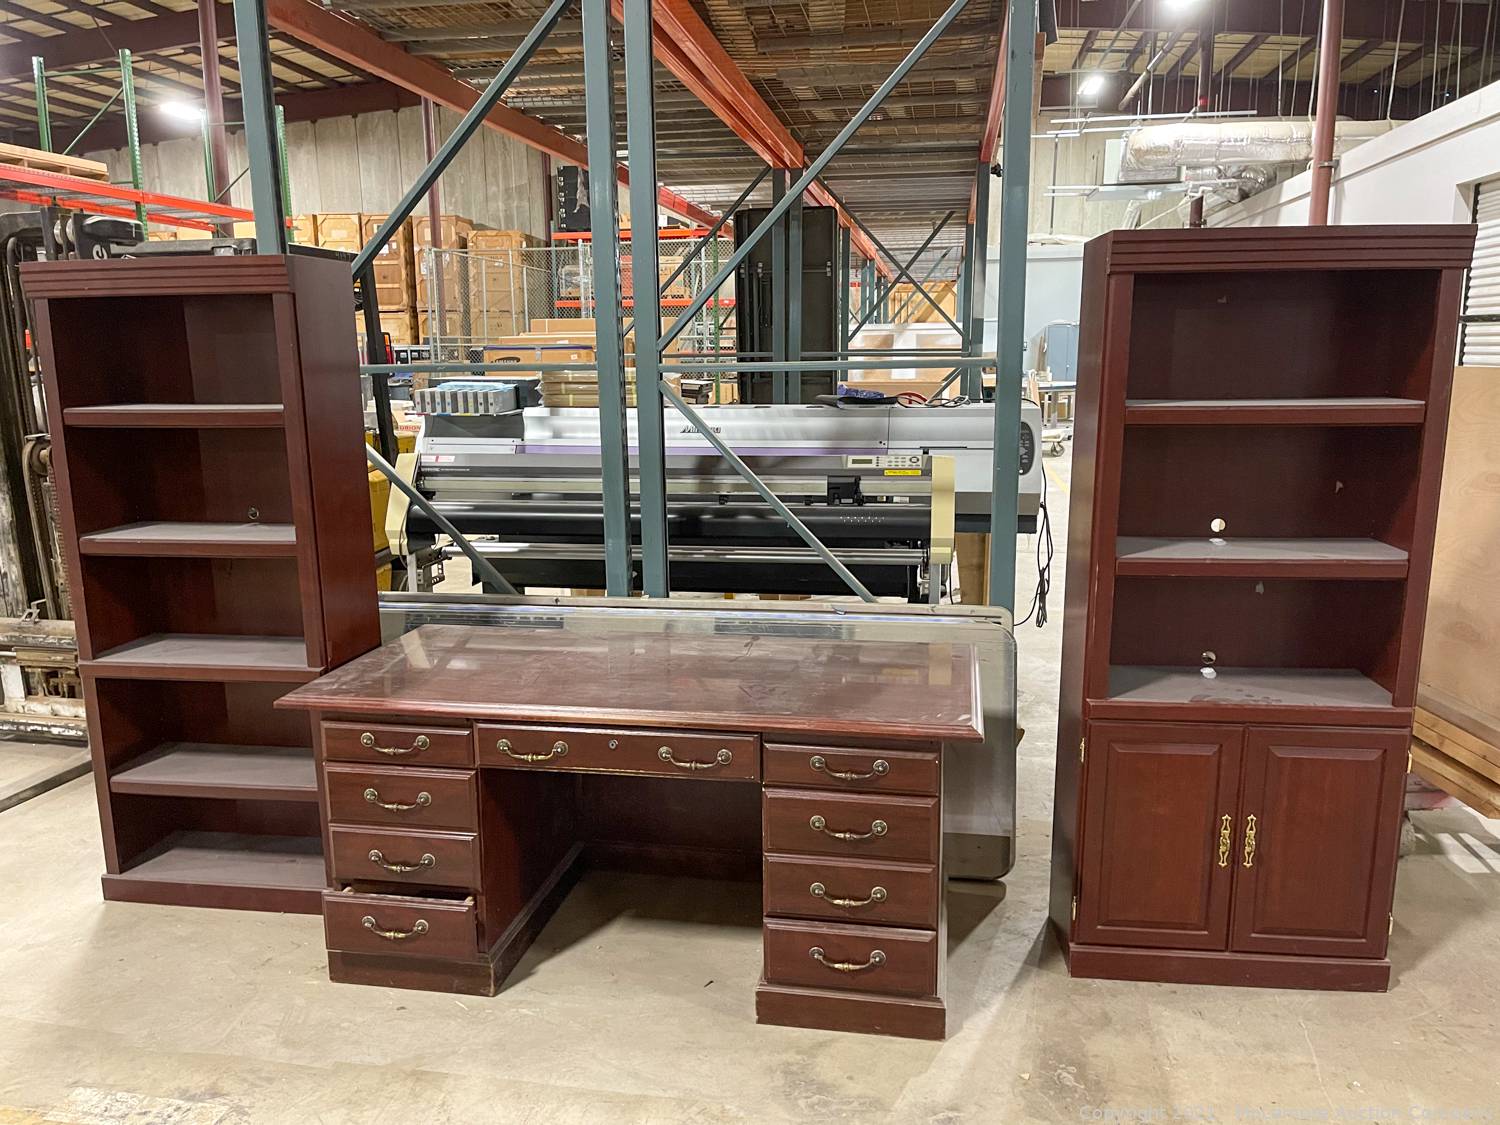 mclemore-auction-company-auction-miller-welders-woodworking